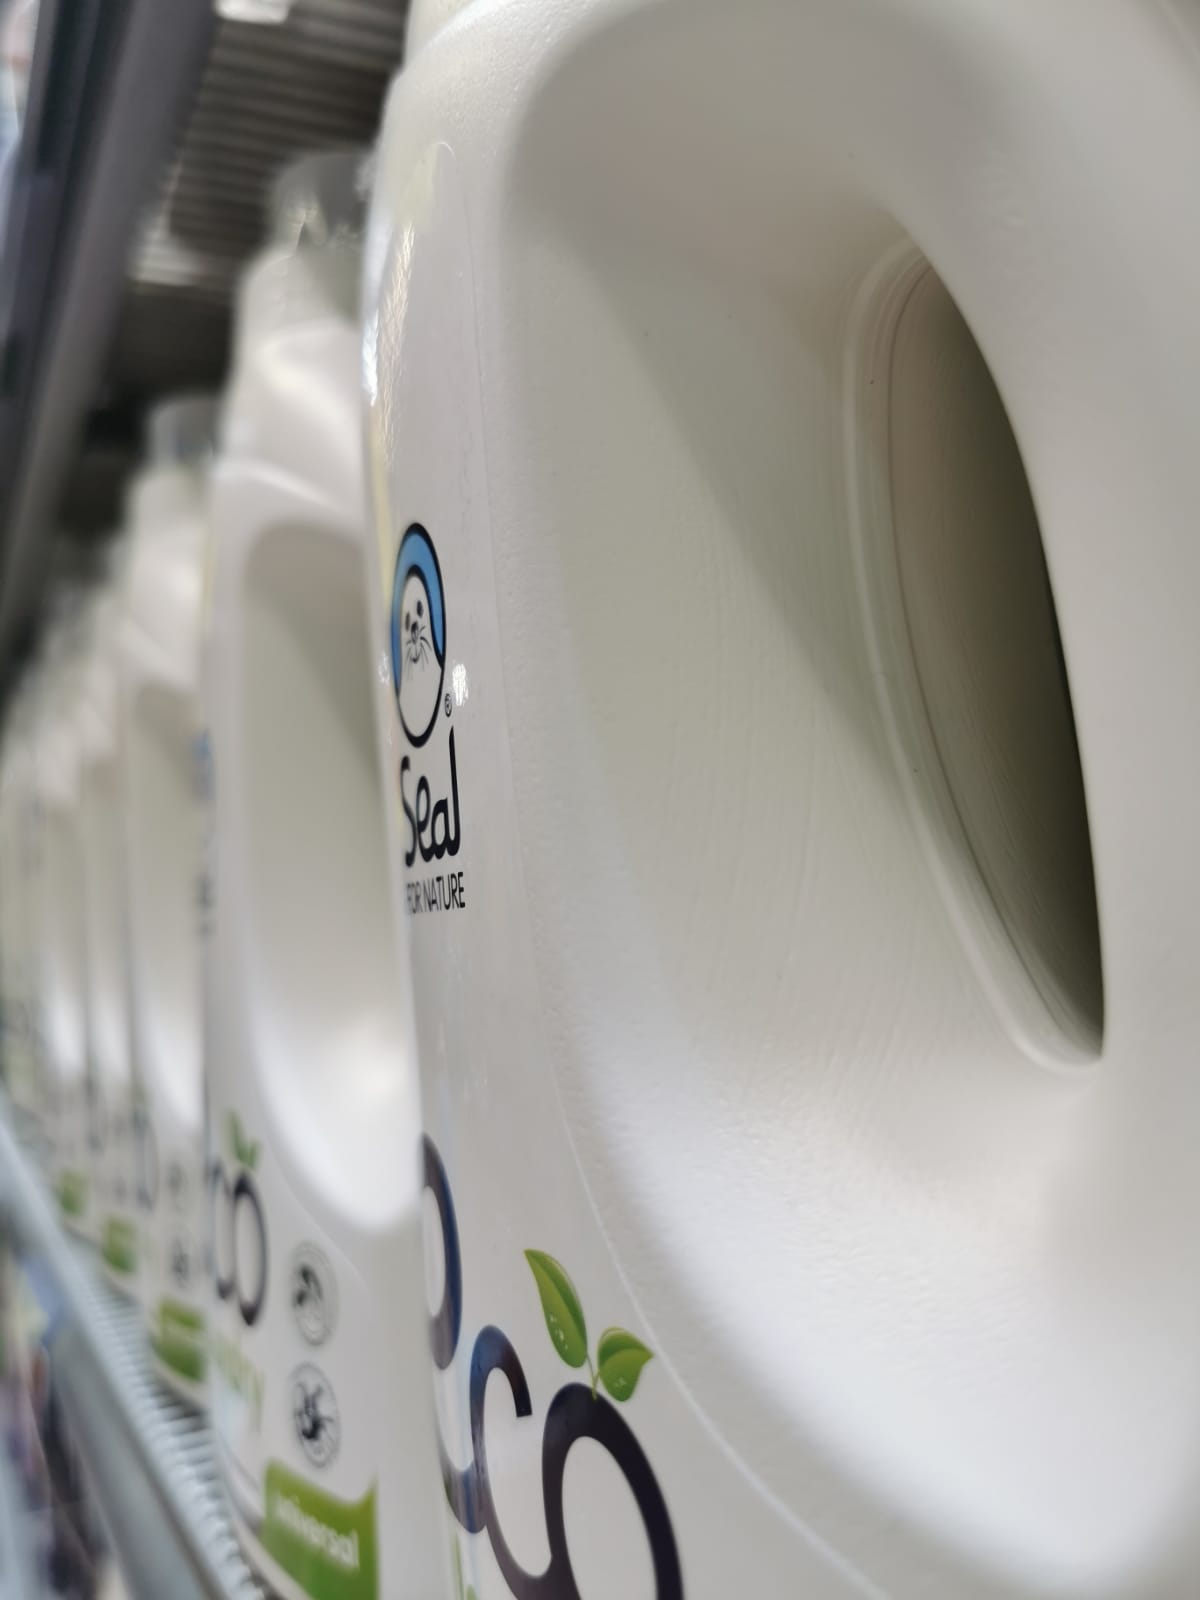 laundry product from brand seal of Spodrība put on a shelf as a result of successful merchandising work